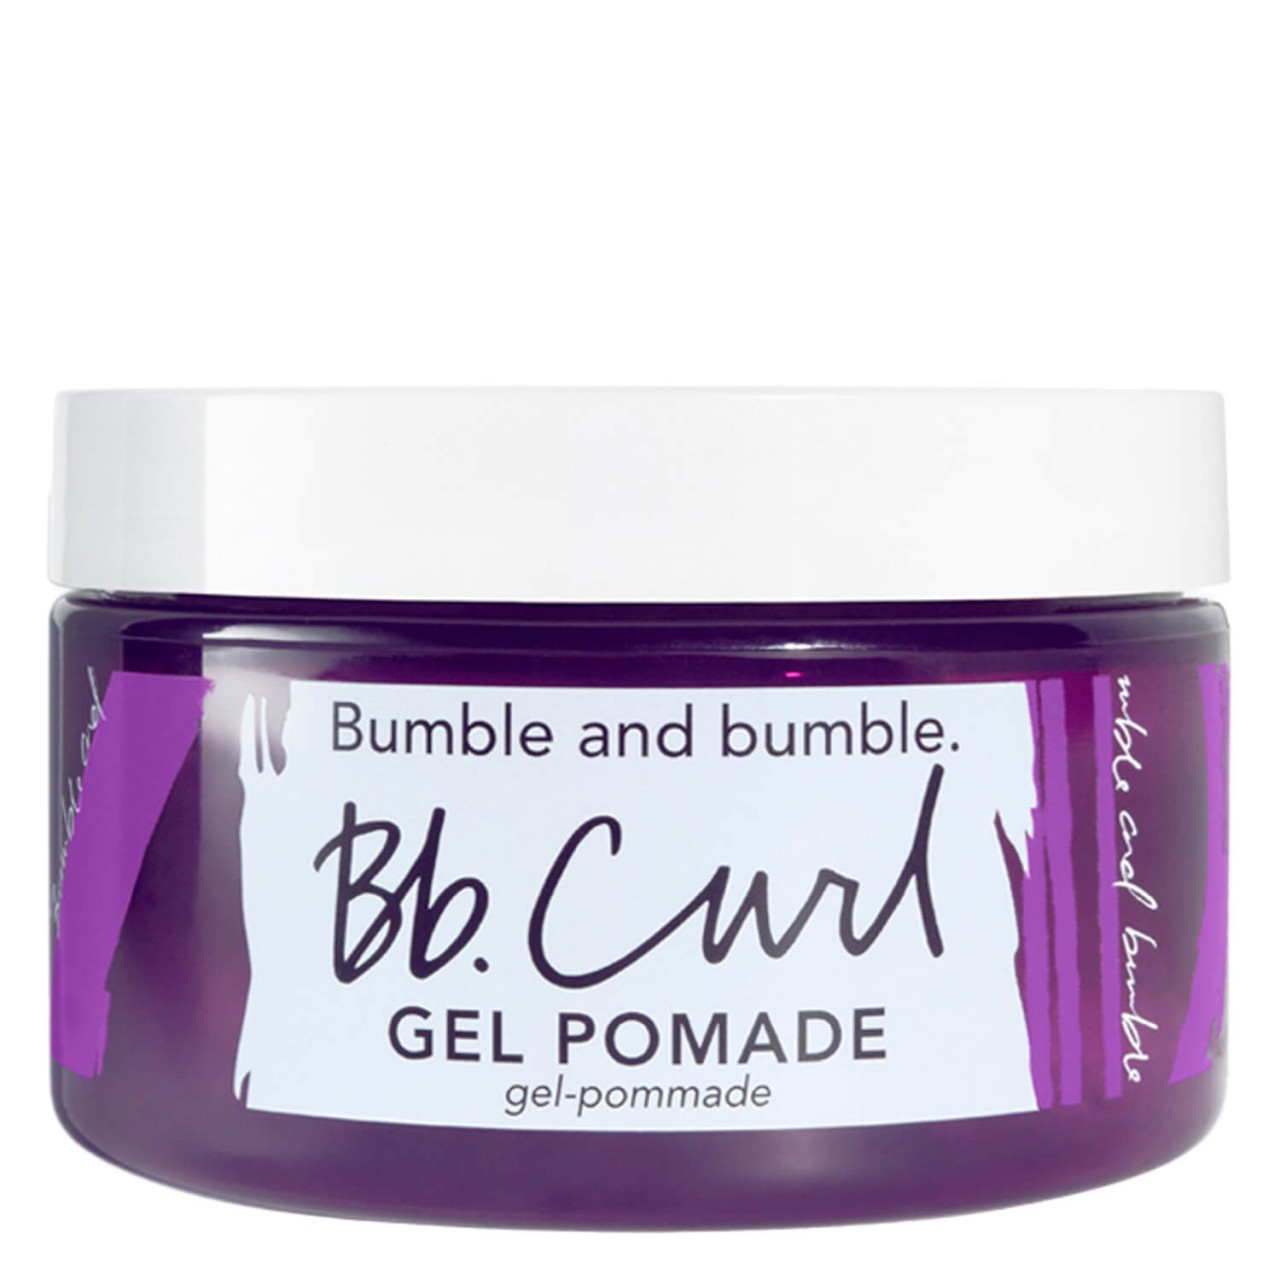 Bb. Curl Finishing Gel Pomade von Bumble and bumble.